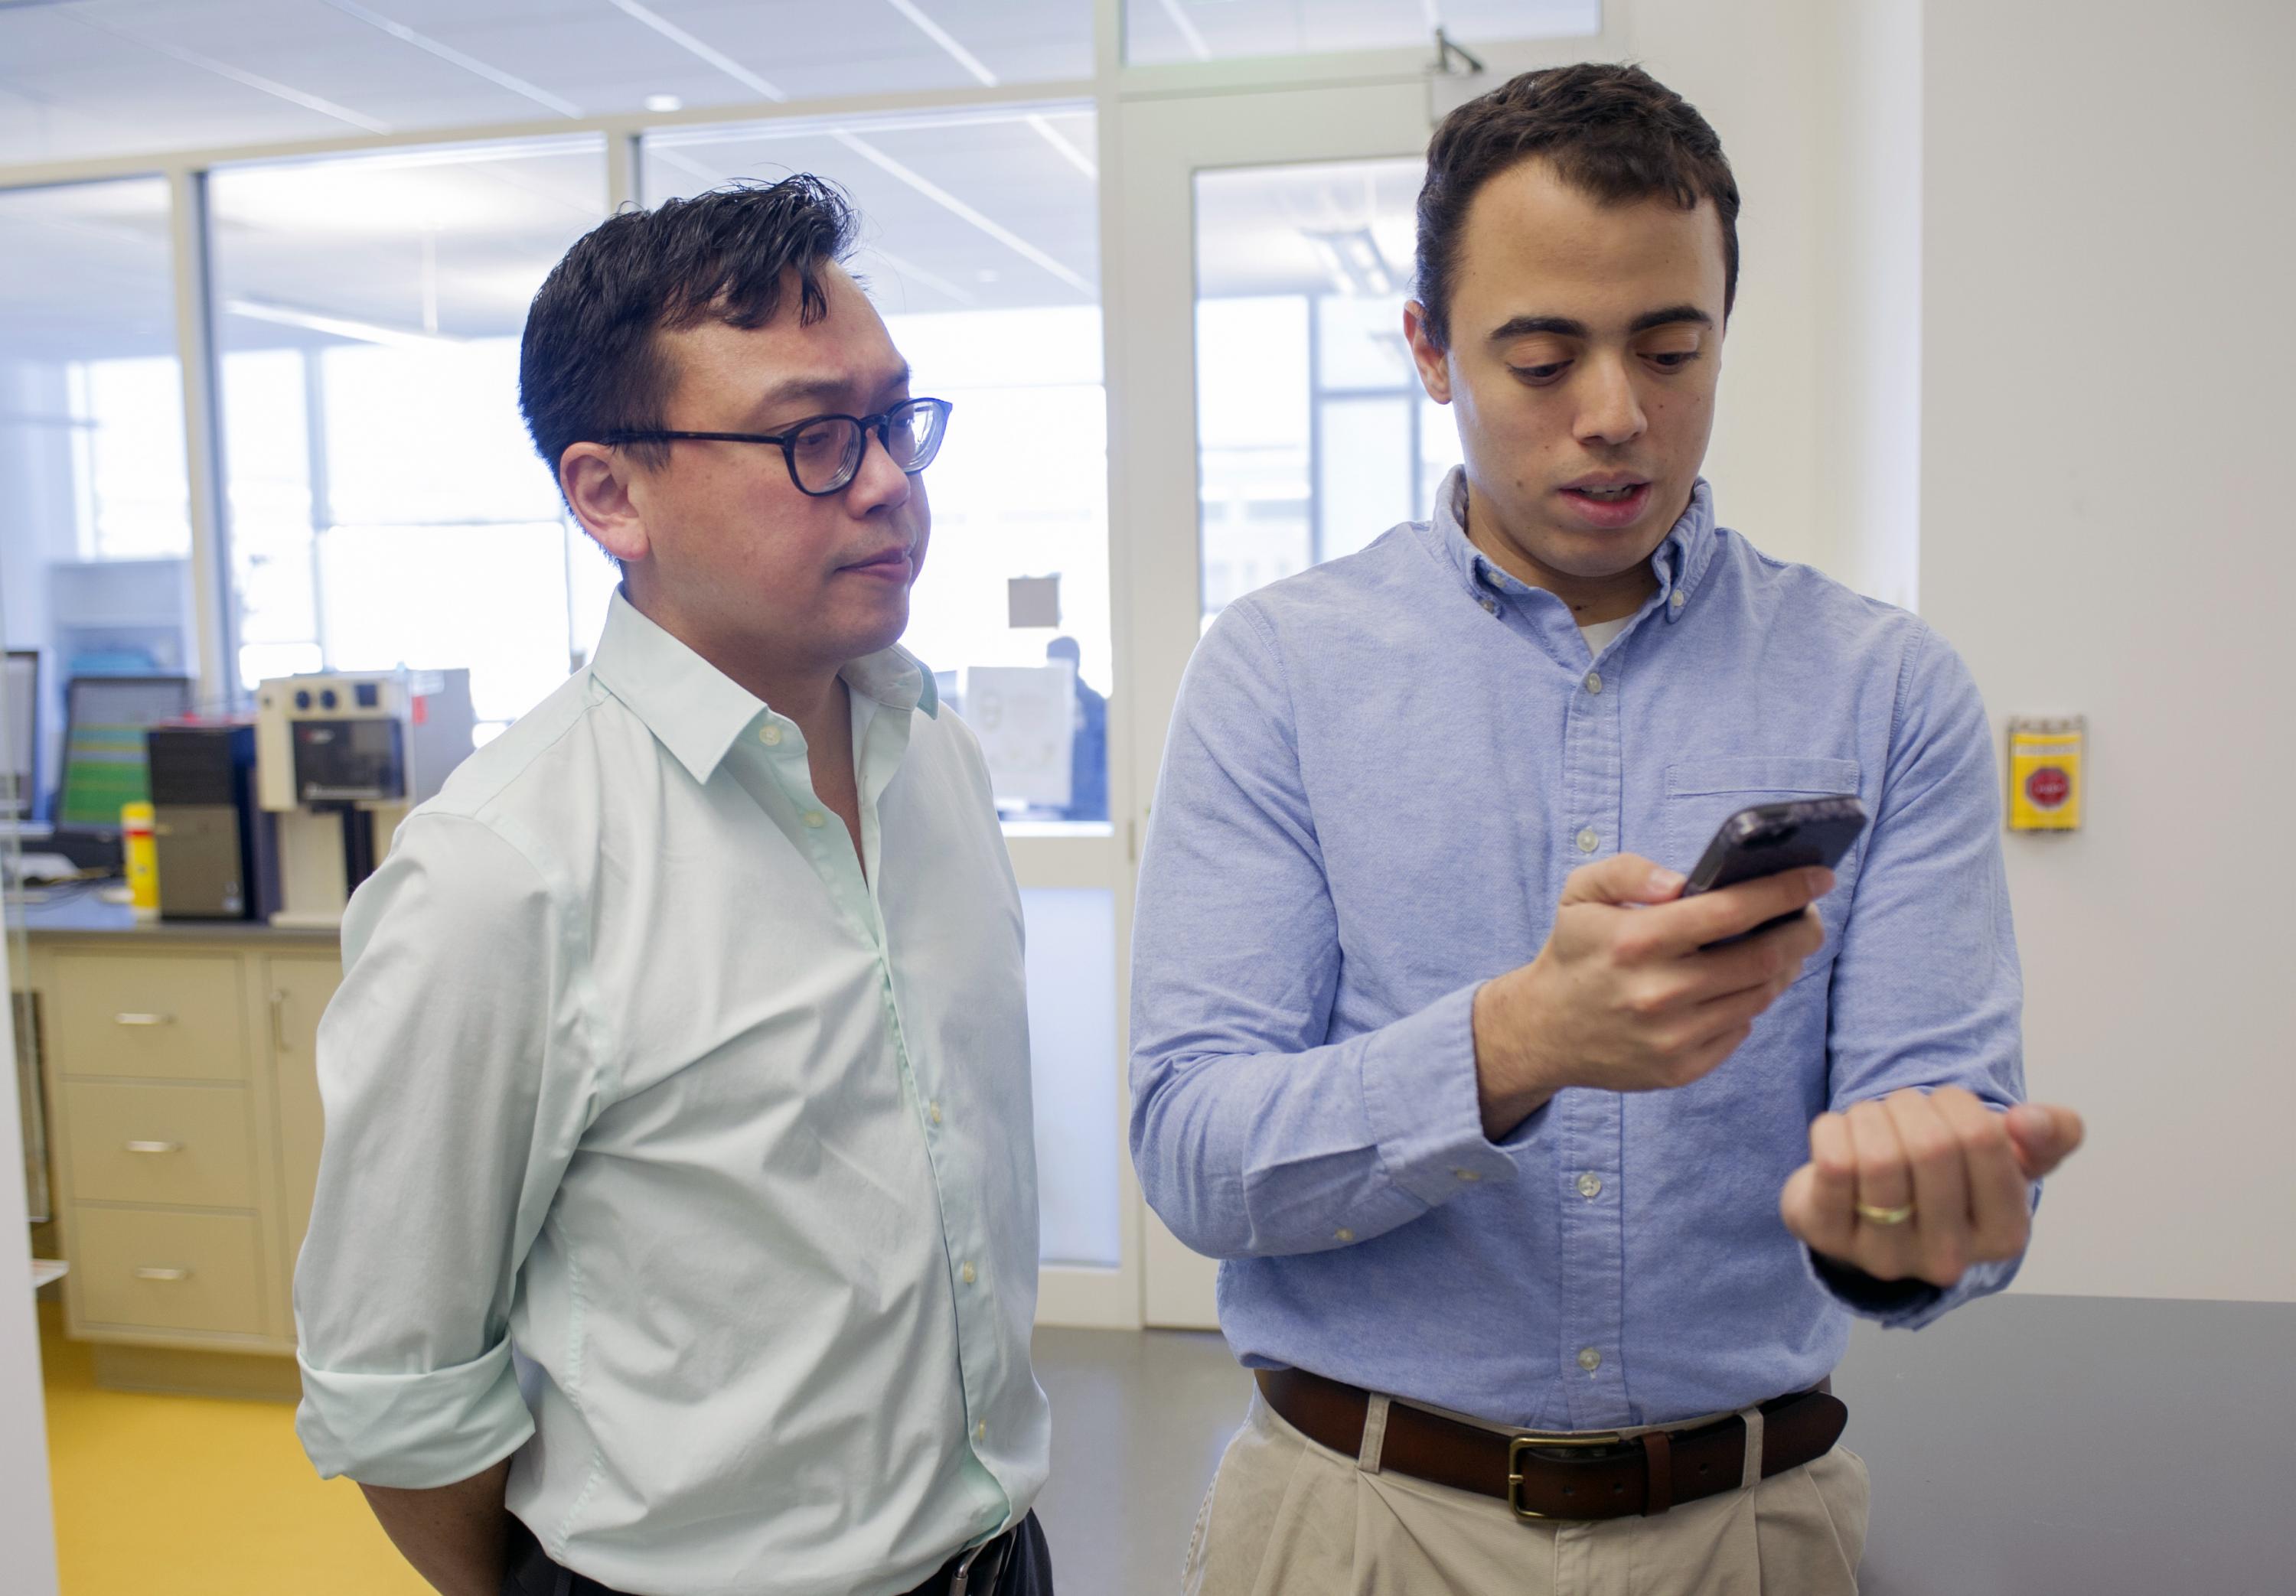 Graduate student Rob Mannino (right), pictured with Wilbur Lam (left), looks at his own fingernails using the new anemia test app. Credit: Georgia Tech / Christopher Moore